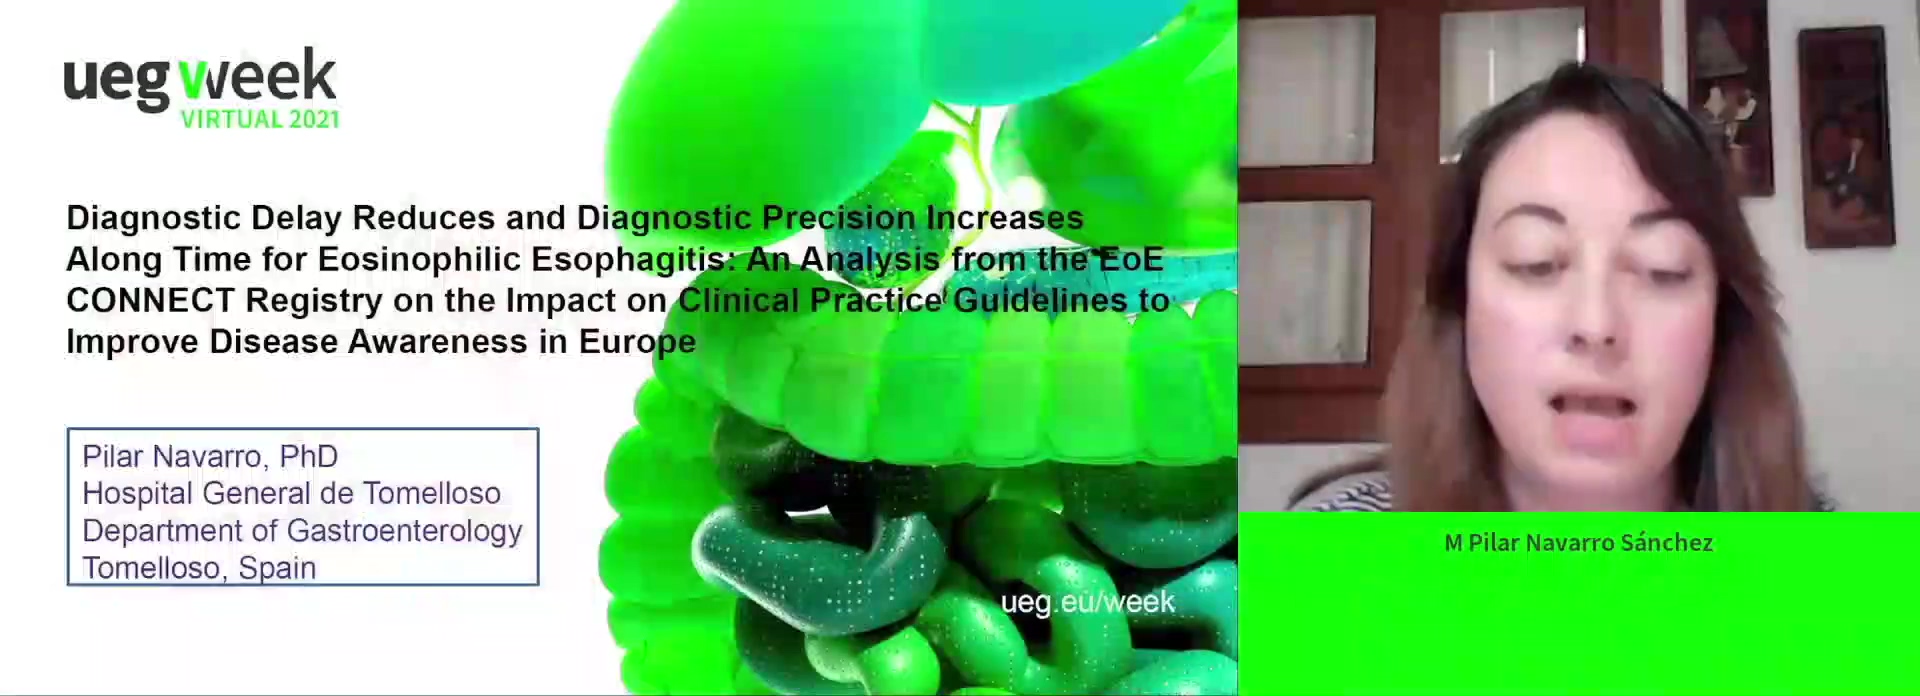 DIAGNOSTIC DELAY REDUCES AND DIAGNOSTIC PRECISION INCREASES ALONG TIME FOR EOSINOPHILIC ESOPHAGITIS: AN ANALYSIS FROM THE EOE CONNECT REGISTRY ON THE IMPACT ON CLINICAL PRACTICE GUIDELINES TO IMPROVE DISEASE AWARENESS IN EUROPE